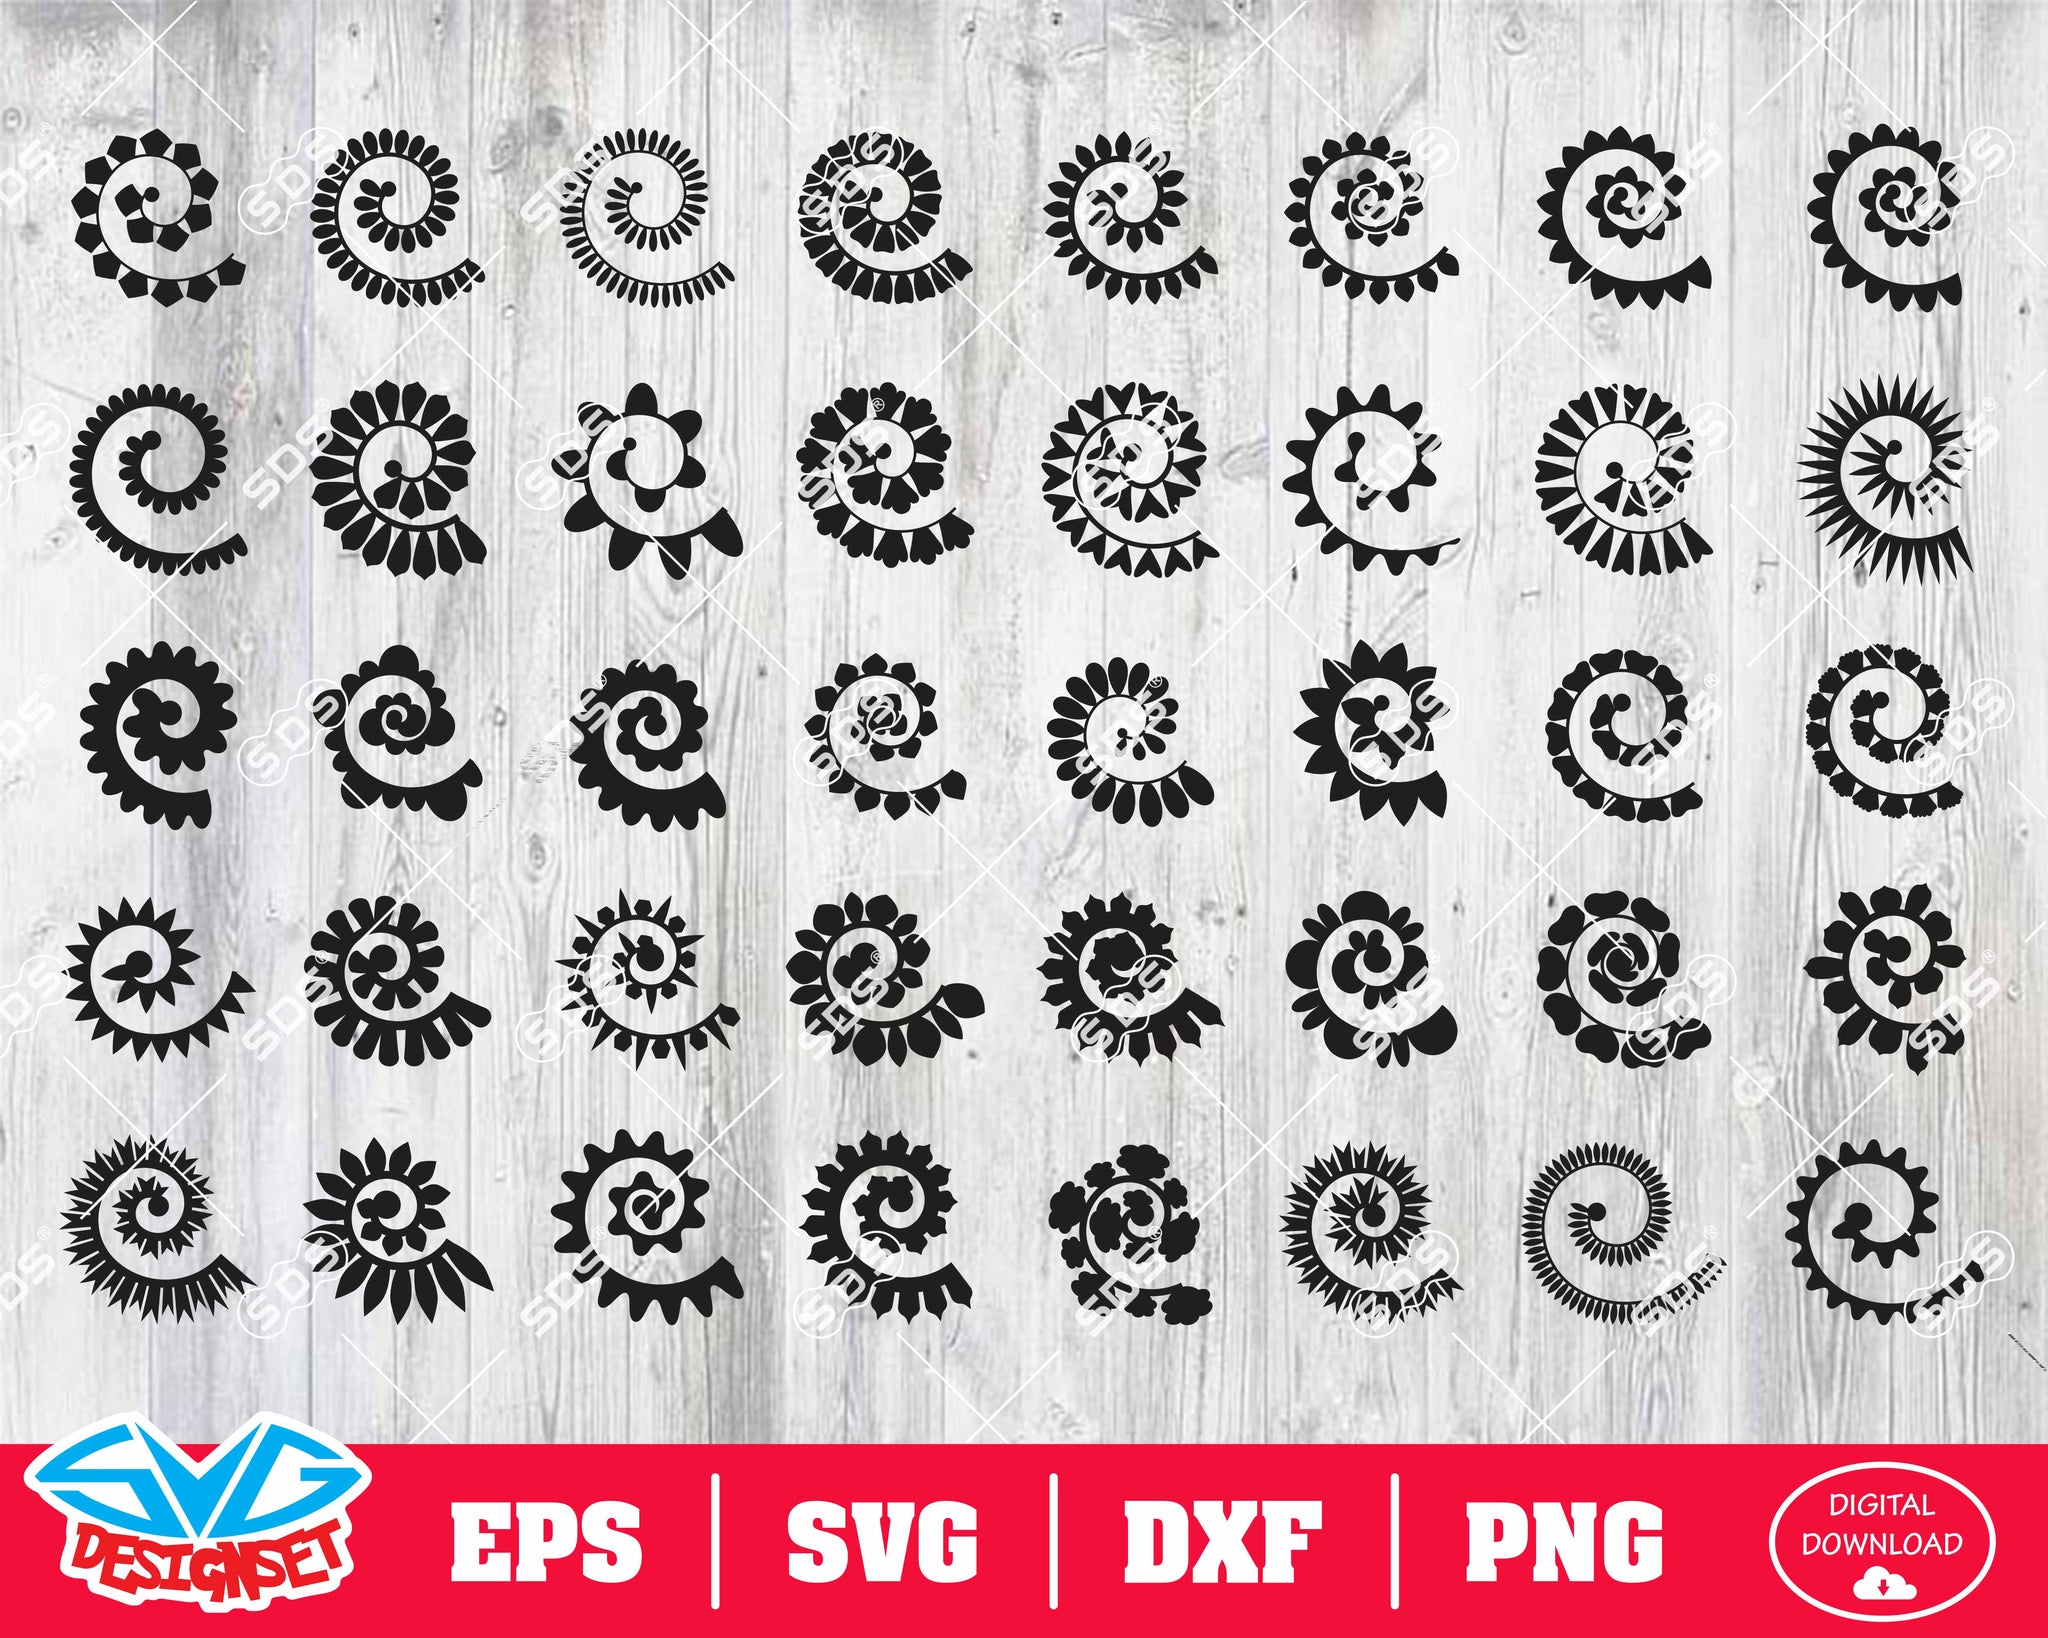 Rolled flowers Svg, Dxf, Eps, Png, Clipart, Silhouette and Cutfiles #1 - SVGDesignSets